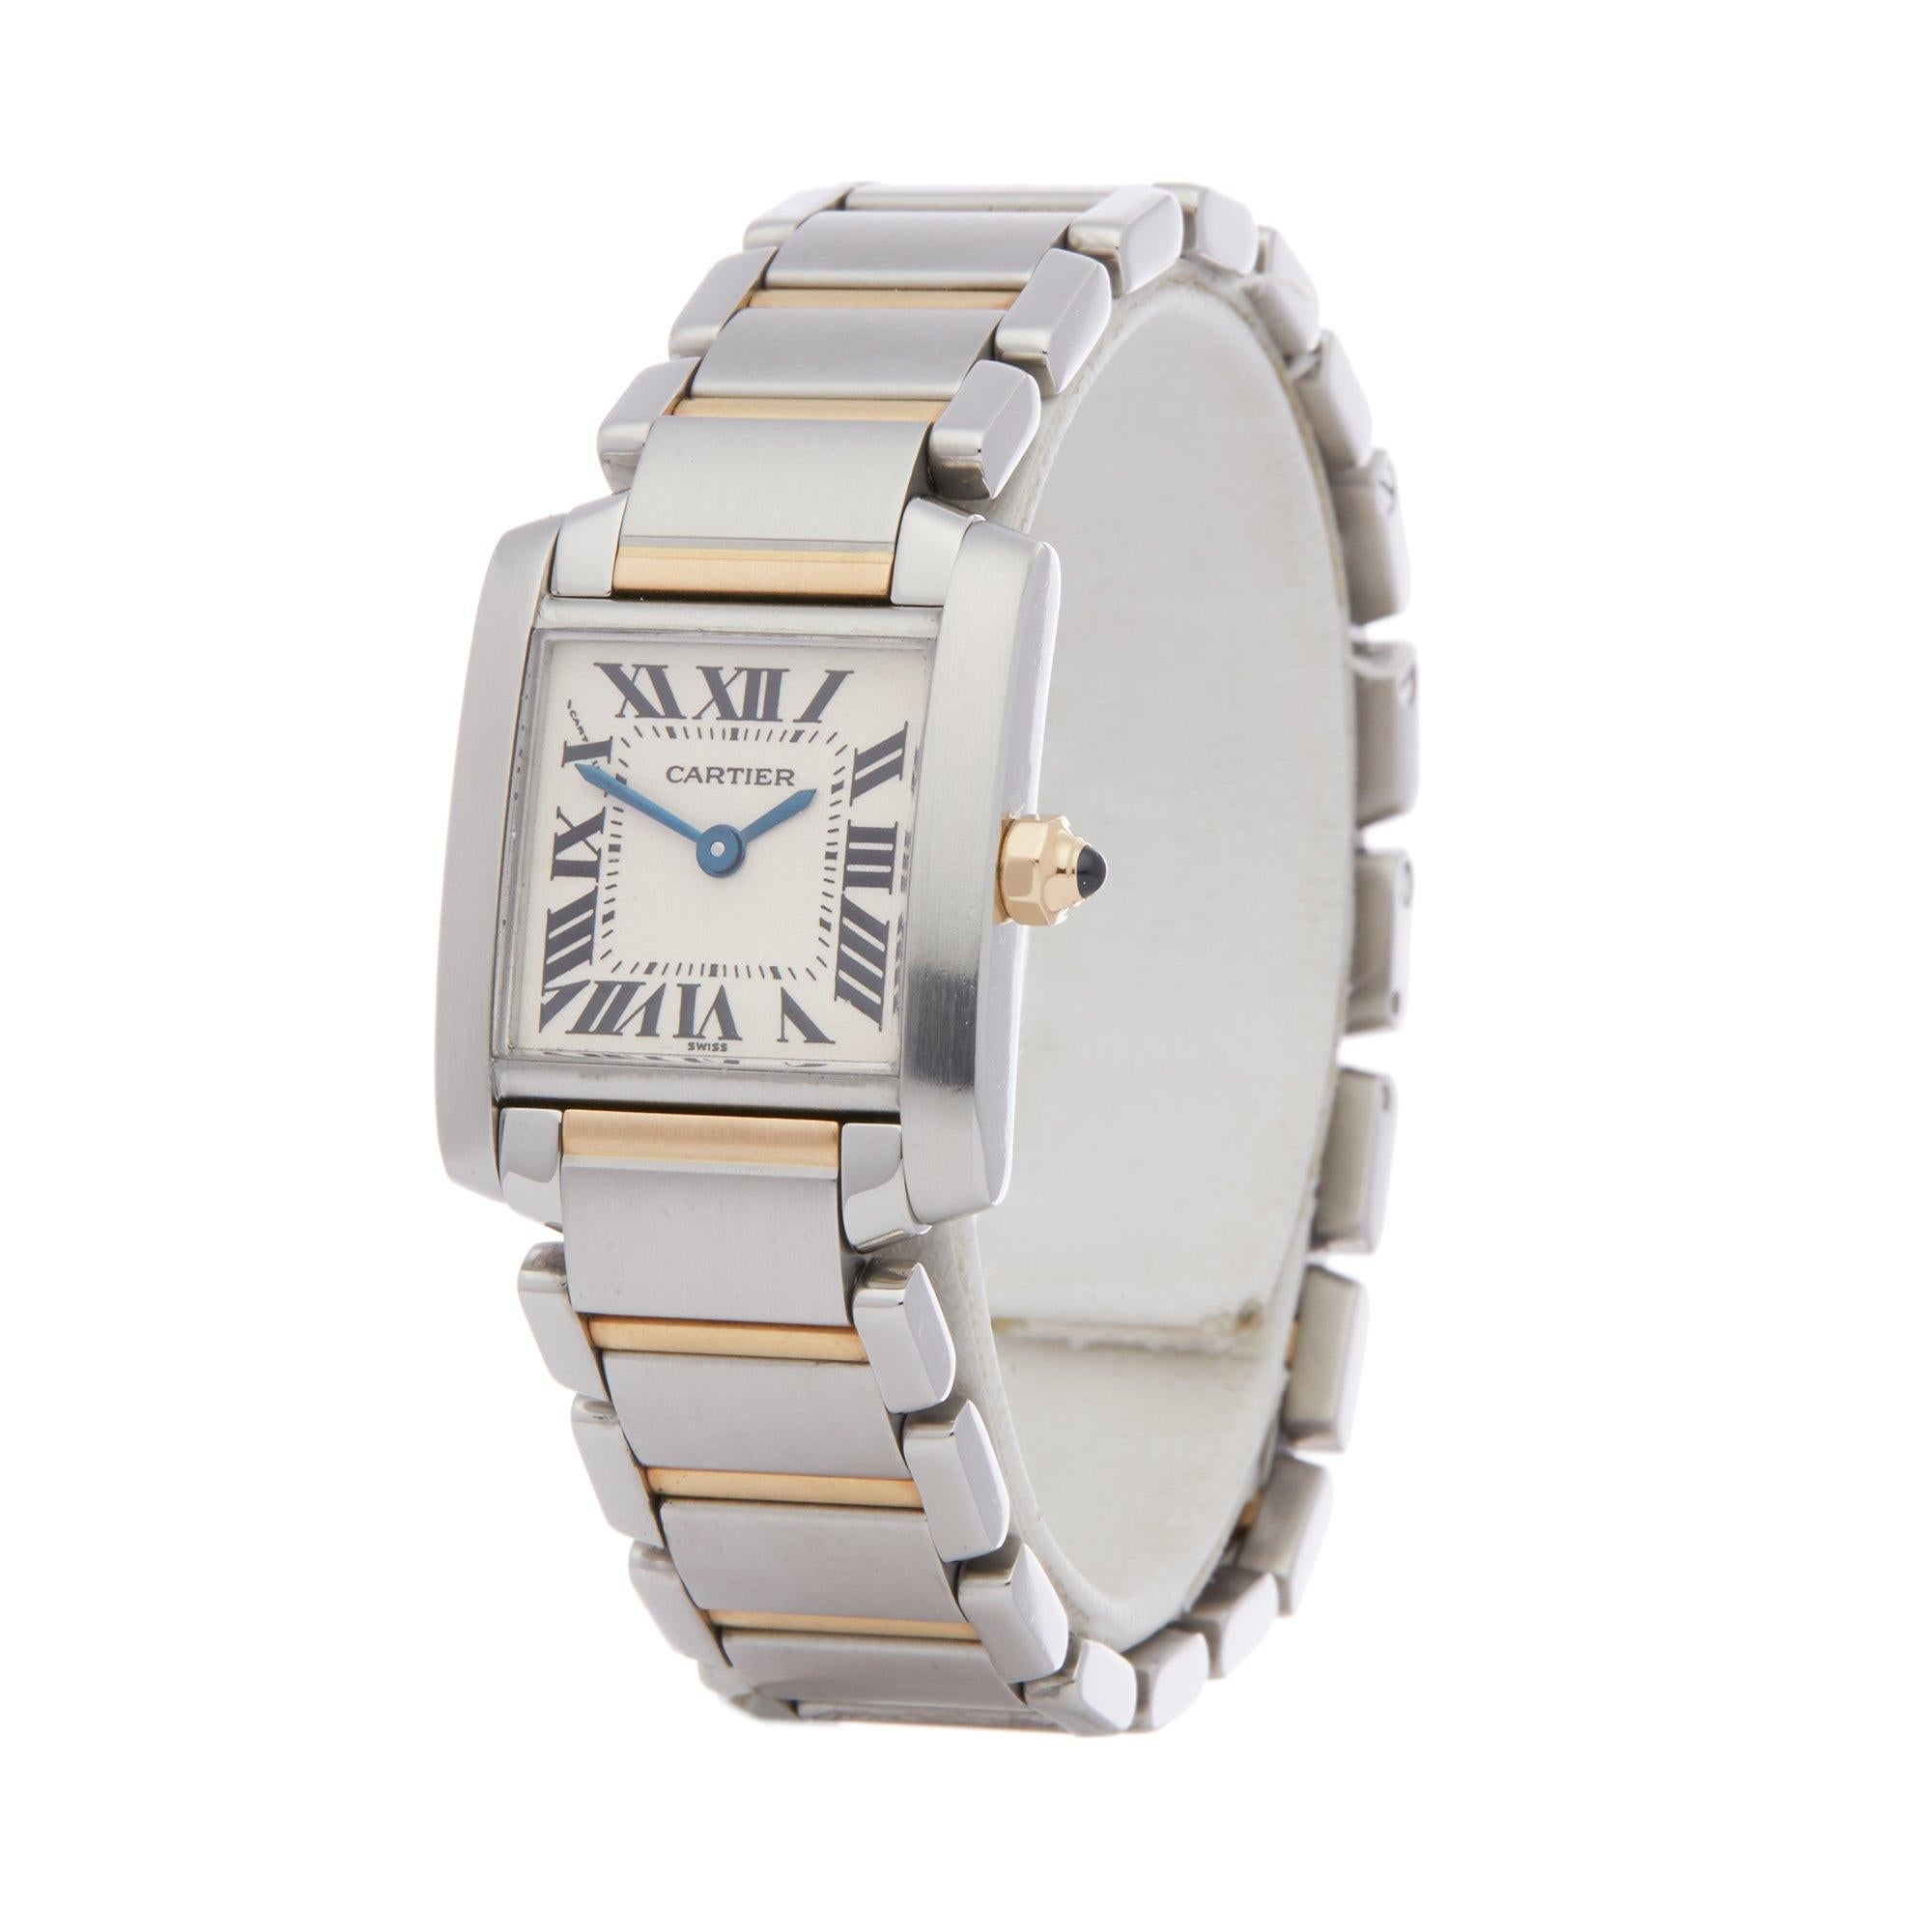 Xupes Reference: W007460
Manufacturer: Cartier
Model: Tank
Model Variant: Francaise
Model Number: 2300
Age: 1990
Gender: Ladies
Complete With: Cartier Box 
Dial: White Roman
Glass: Sapphire Crystal
Case Size: 20mm by 24mm
Case Material: Stainless